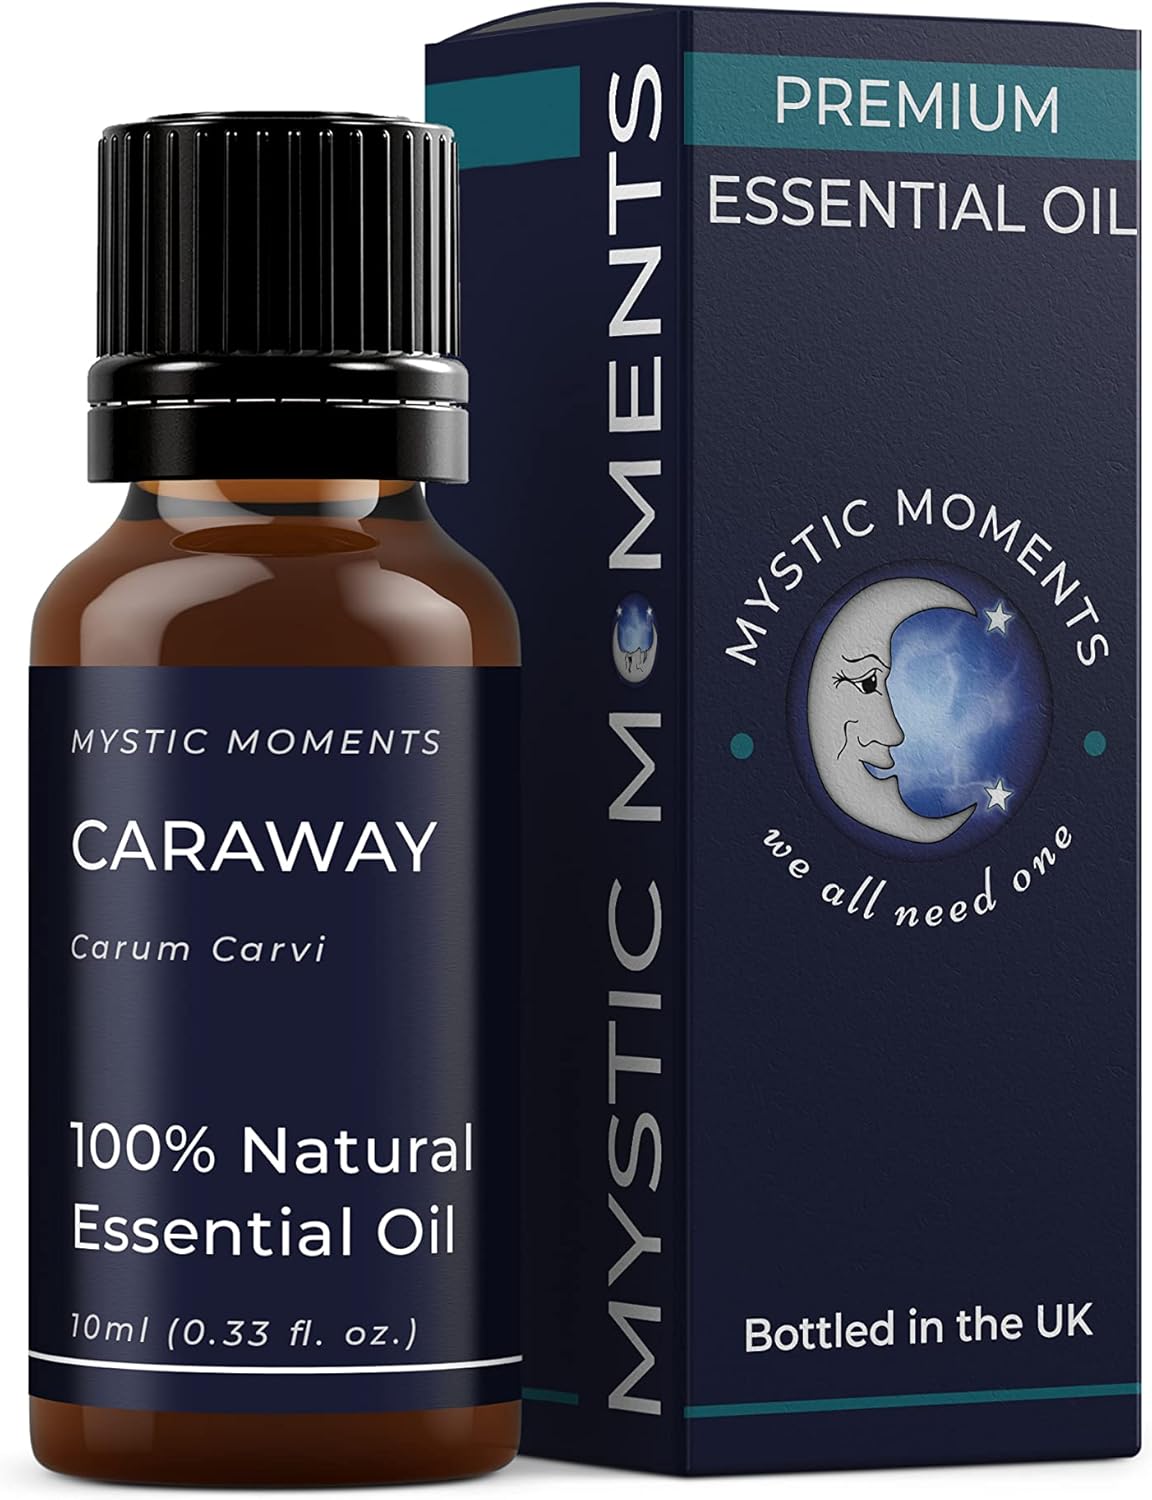 Mystic Moments | Caraway Essential Oil 10ml - Pure & Natural oil for Diffusers, Aromatherapy & Massage Blends Vegan GMO Free